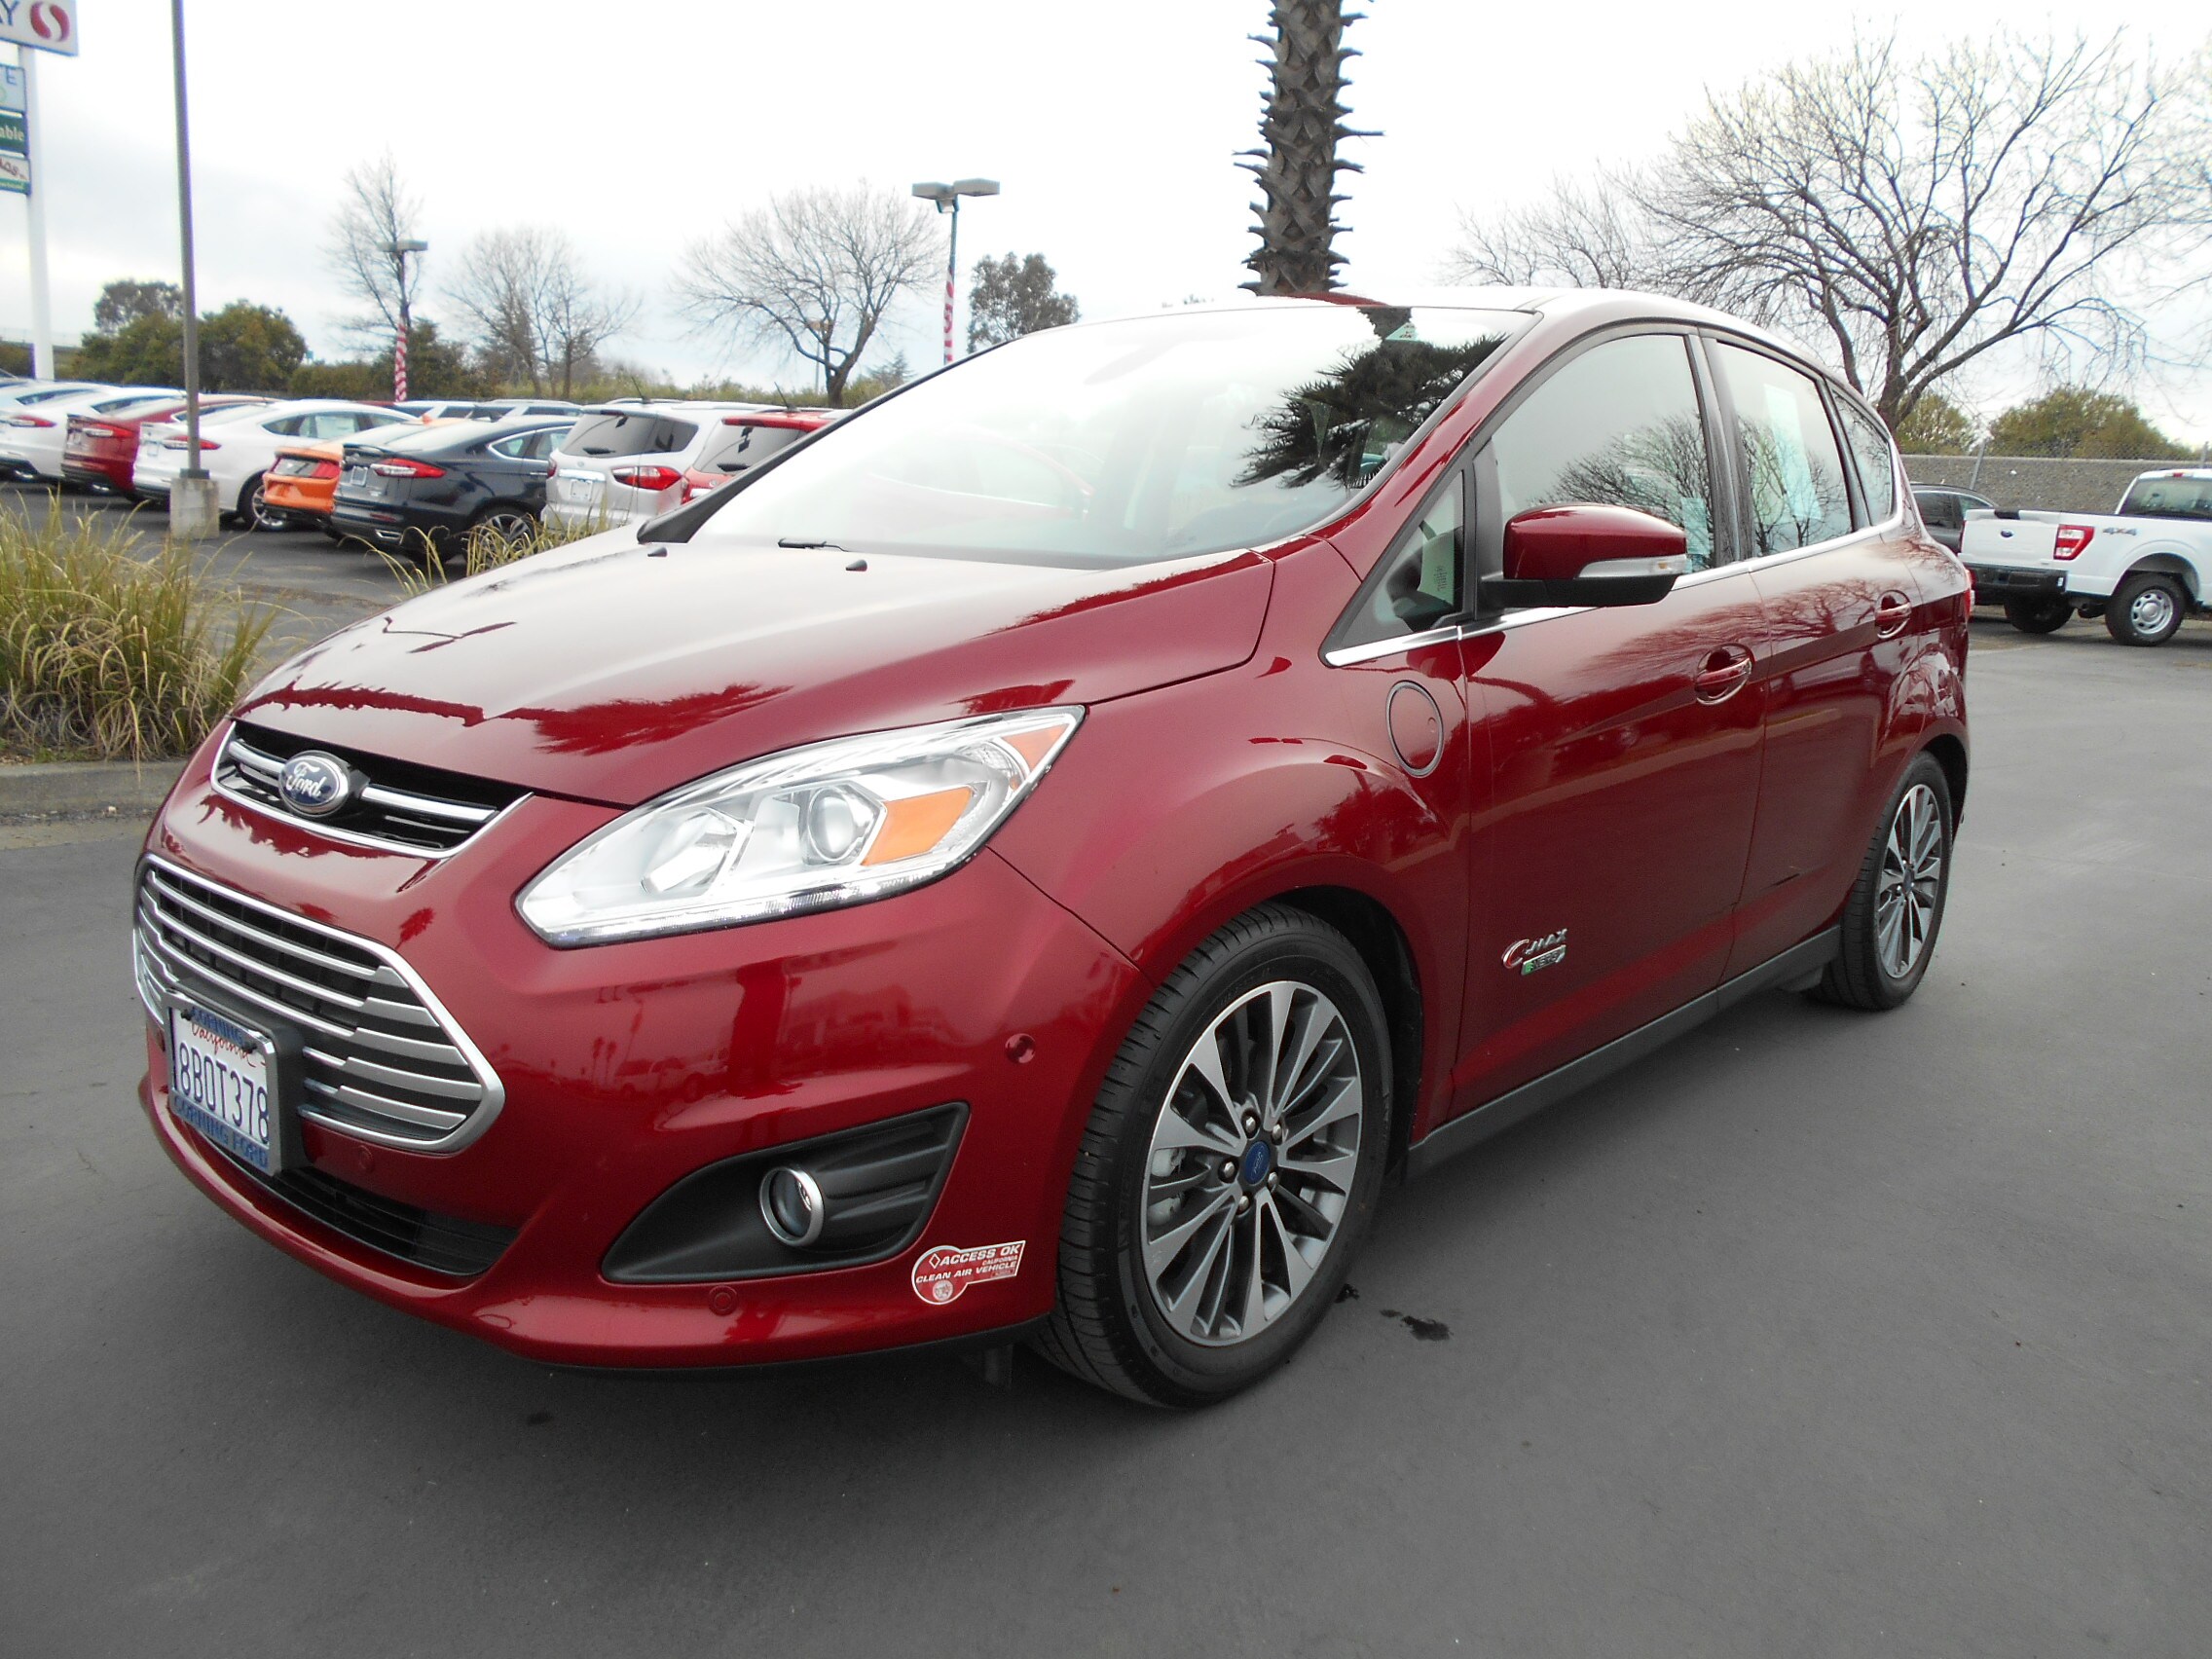 Used 17 Ford C Max For Sale In Corning Corning Ford Serving Chico Red Bluff Ca Vin 1fadp5fu1hl